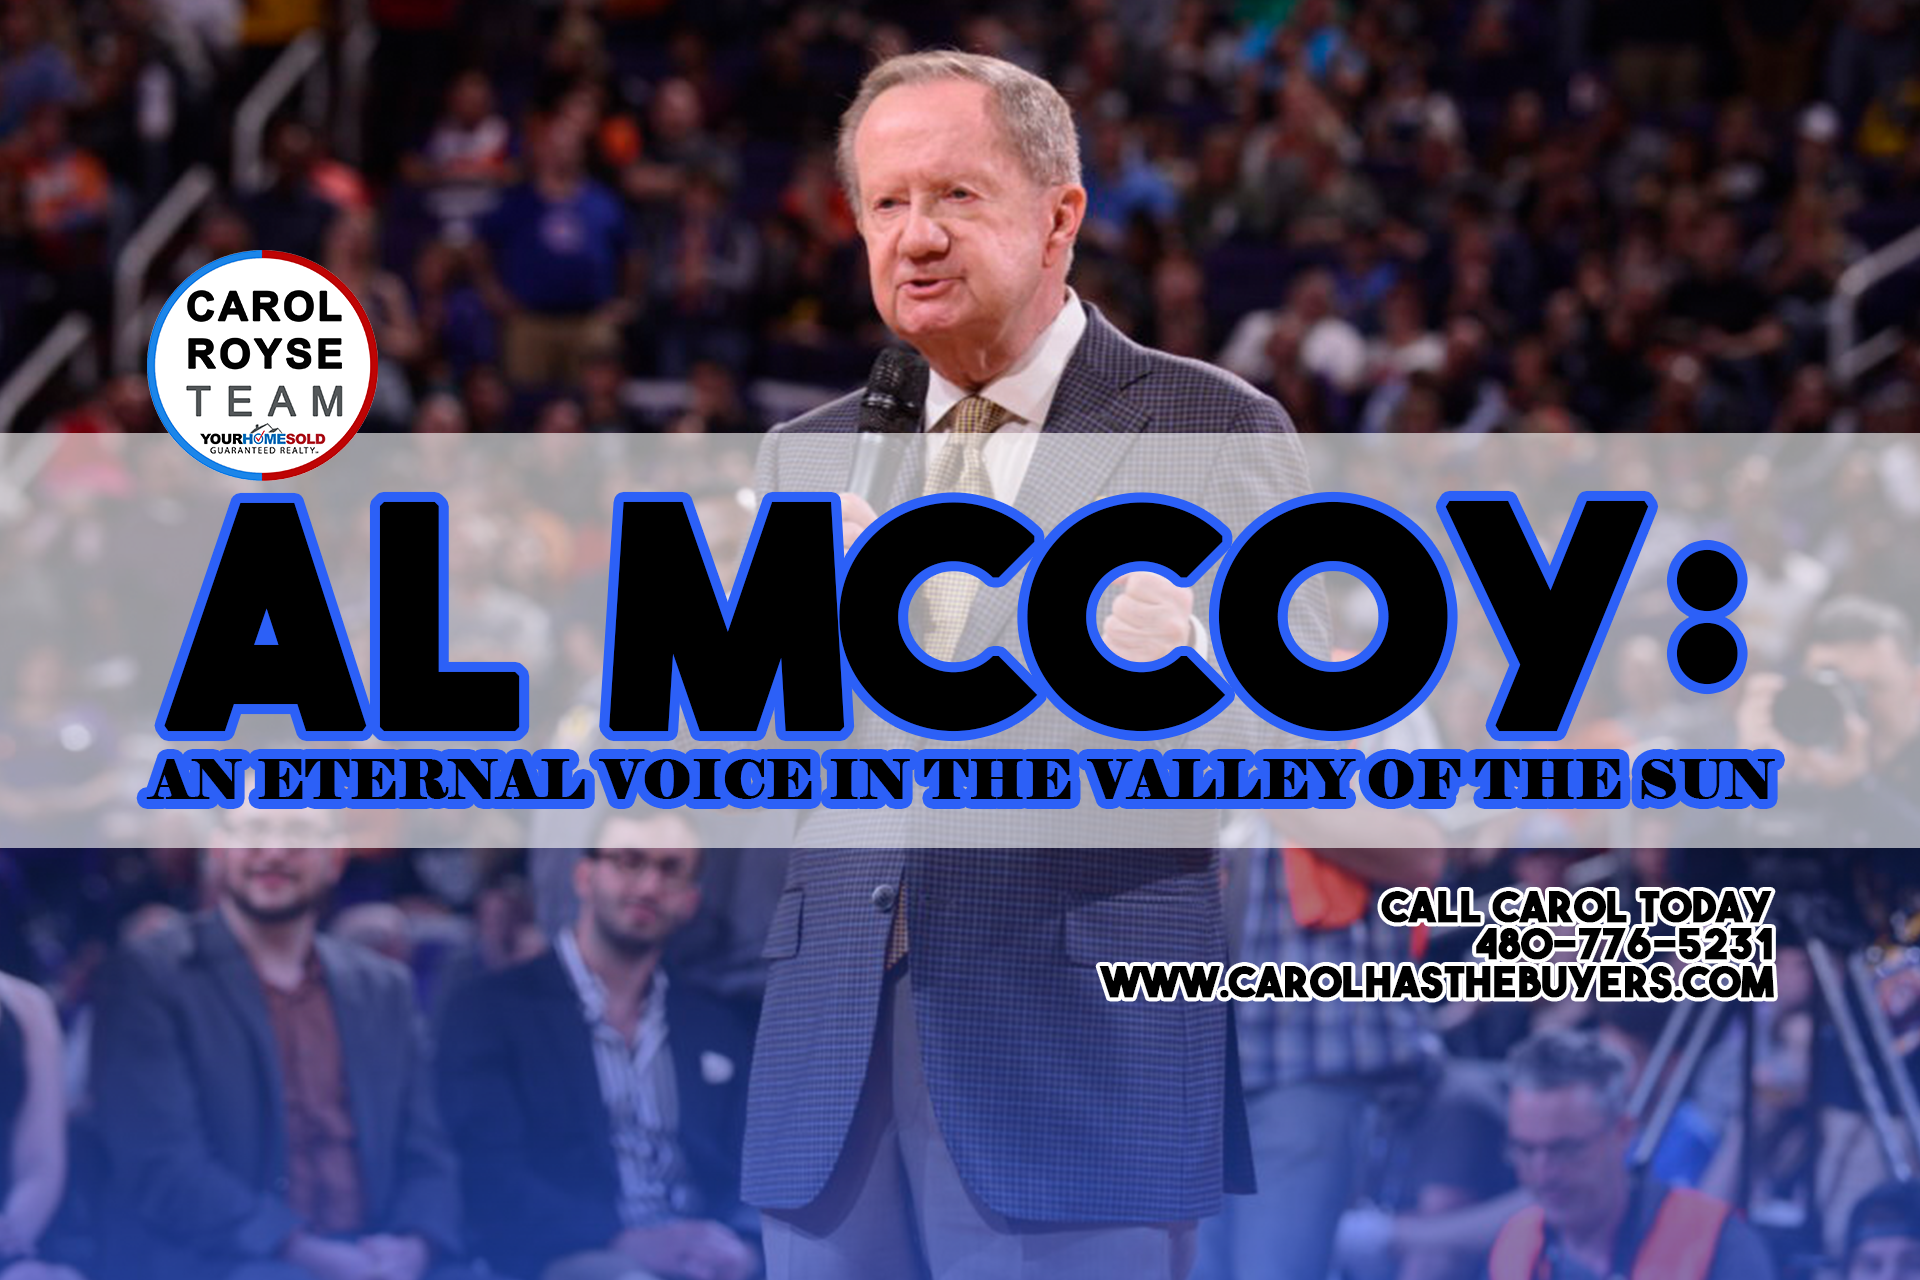 Al McCoy: An Eternal Voice in the Valley of the Sun